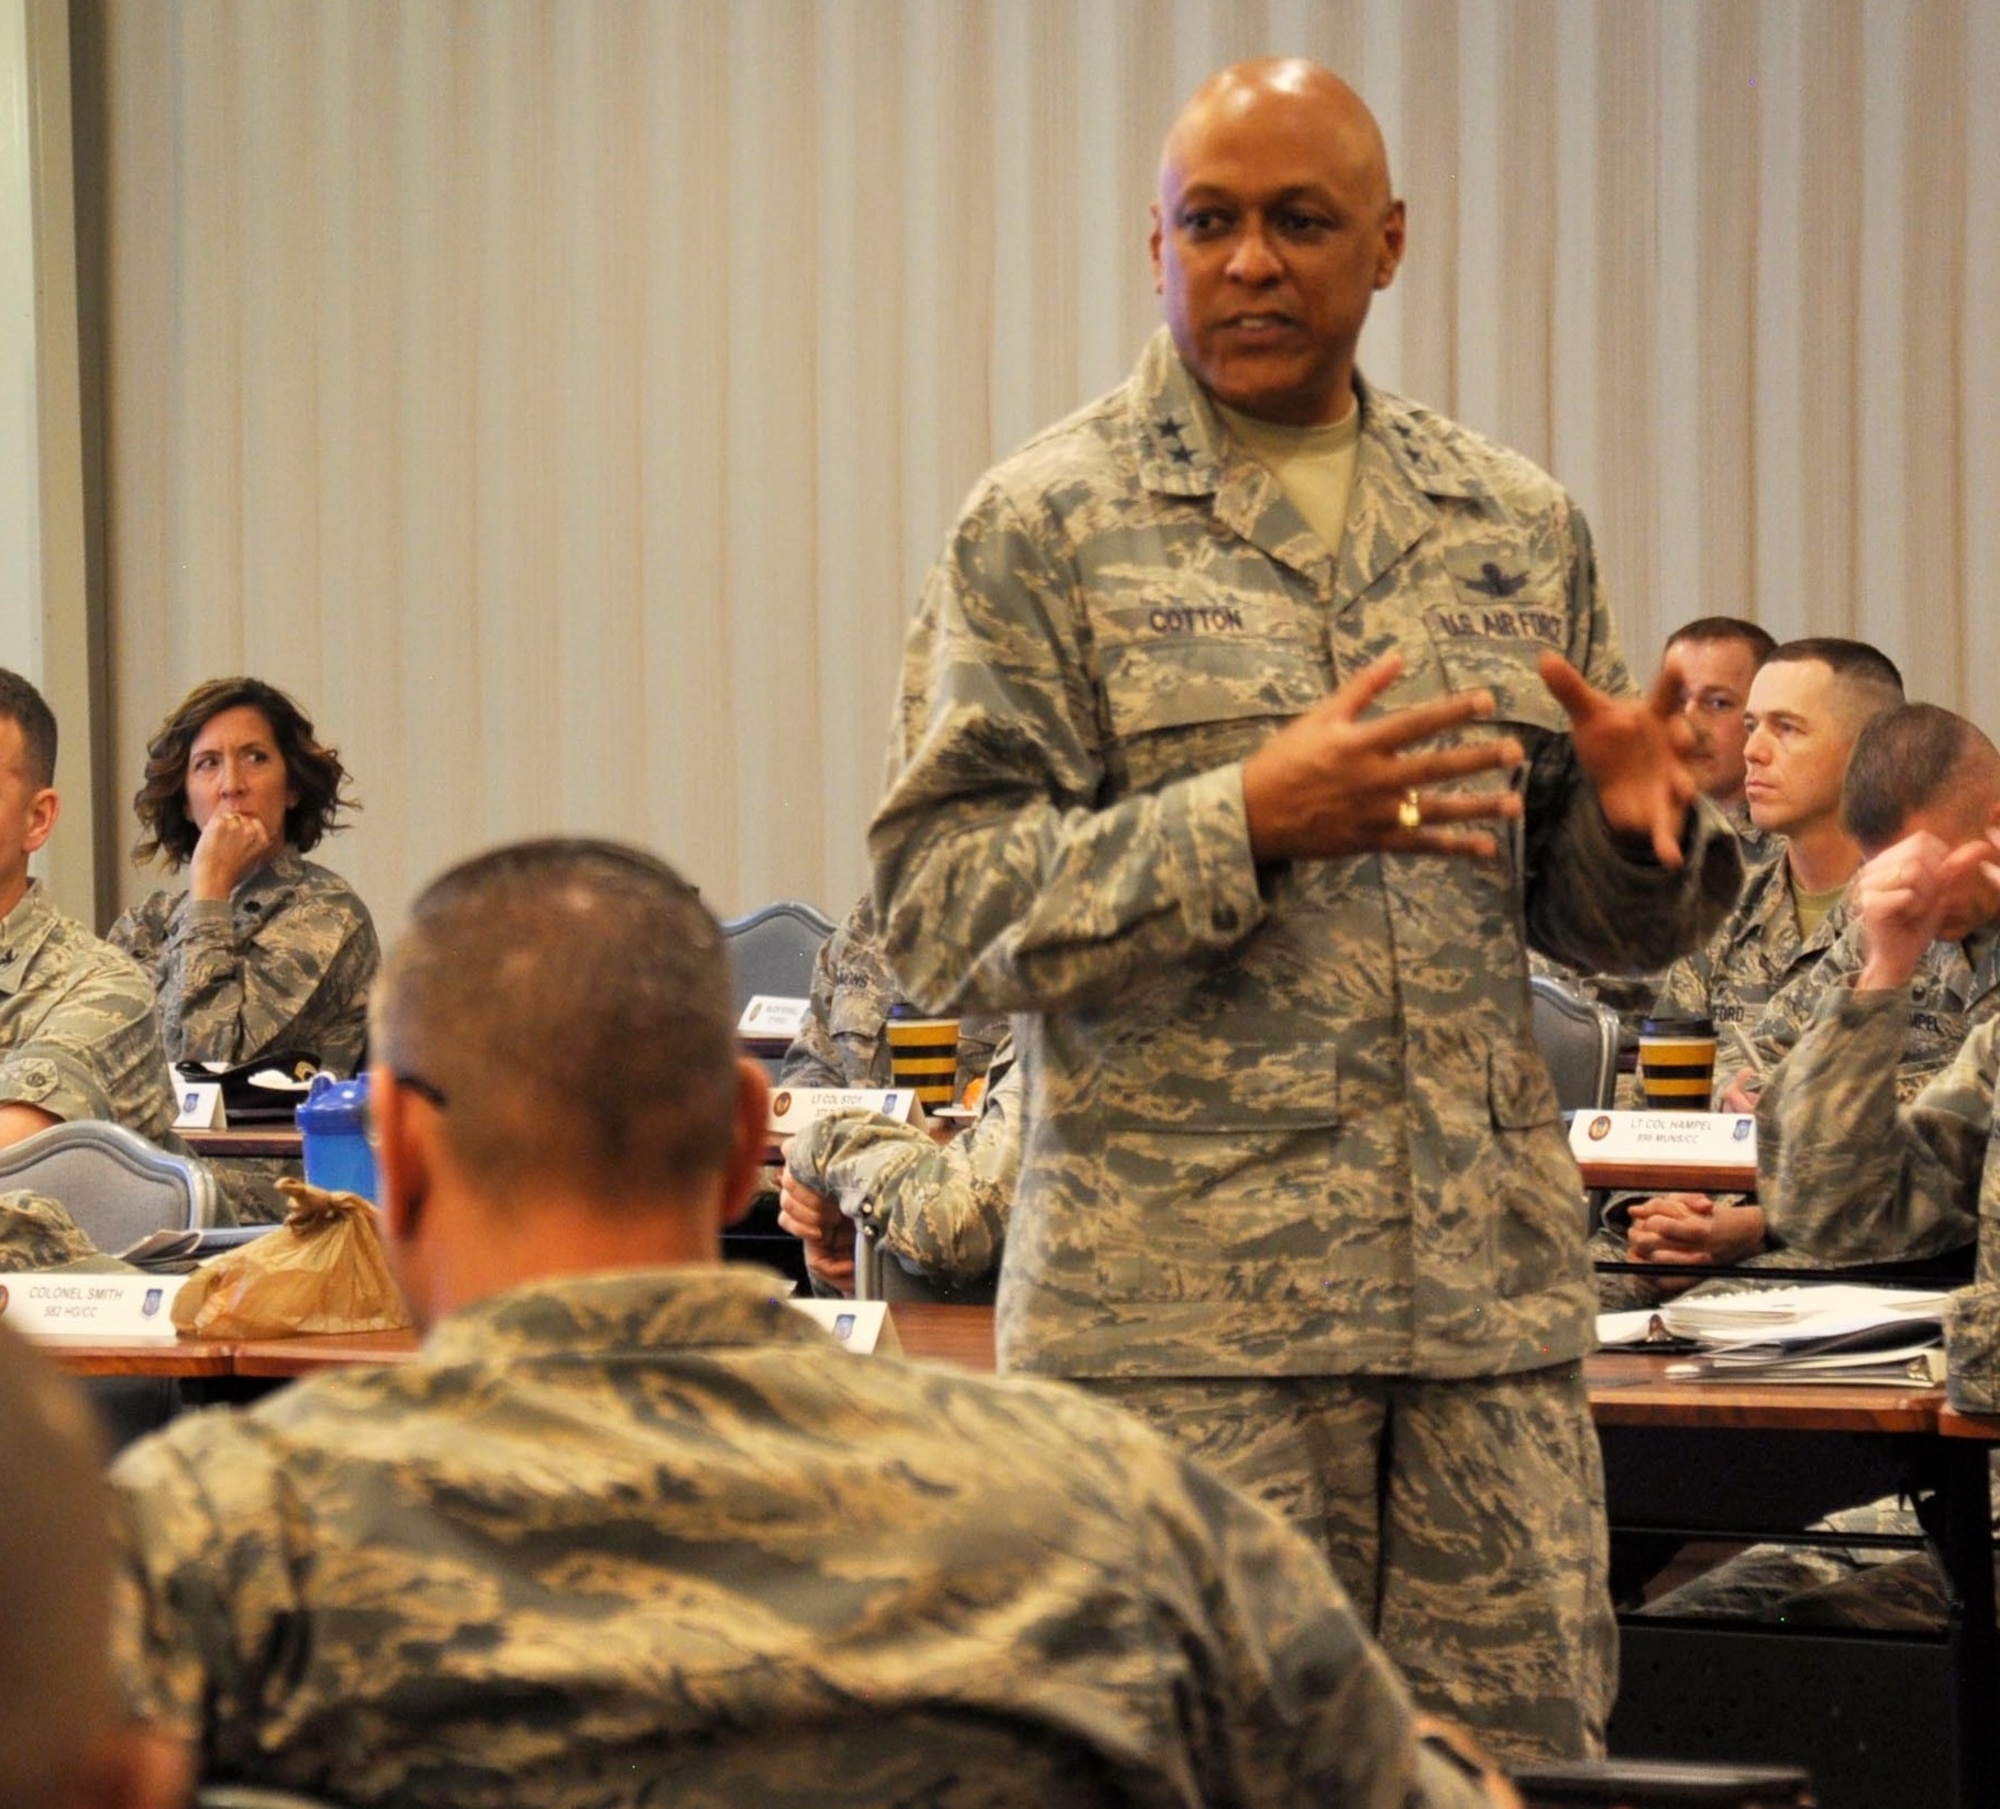 Maj. Gen. Anthony Cotton, 20th Air Force and Task Force 214 commander, addresses his commanders during the 20th AF Senior Leader Conference on F.E. Warren Air Force Base, Wyo., March 30, 2017. Cotton updated commanders on his focus areas and goals, to include heritage and quality of life initiatives. The 20th AF SLC focused on revitalizing the squadron as a core fighting unit, a major focus area of Gen. David L. Goldfein, Air Force Chief of Staff.  (U.S. Air Force photo by 1st Lt Veronica Perez)